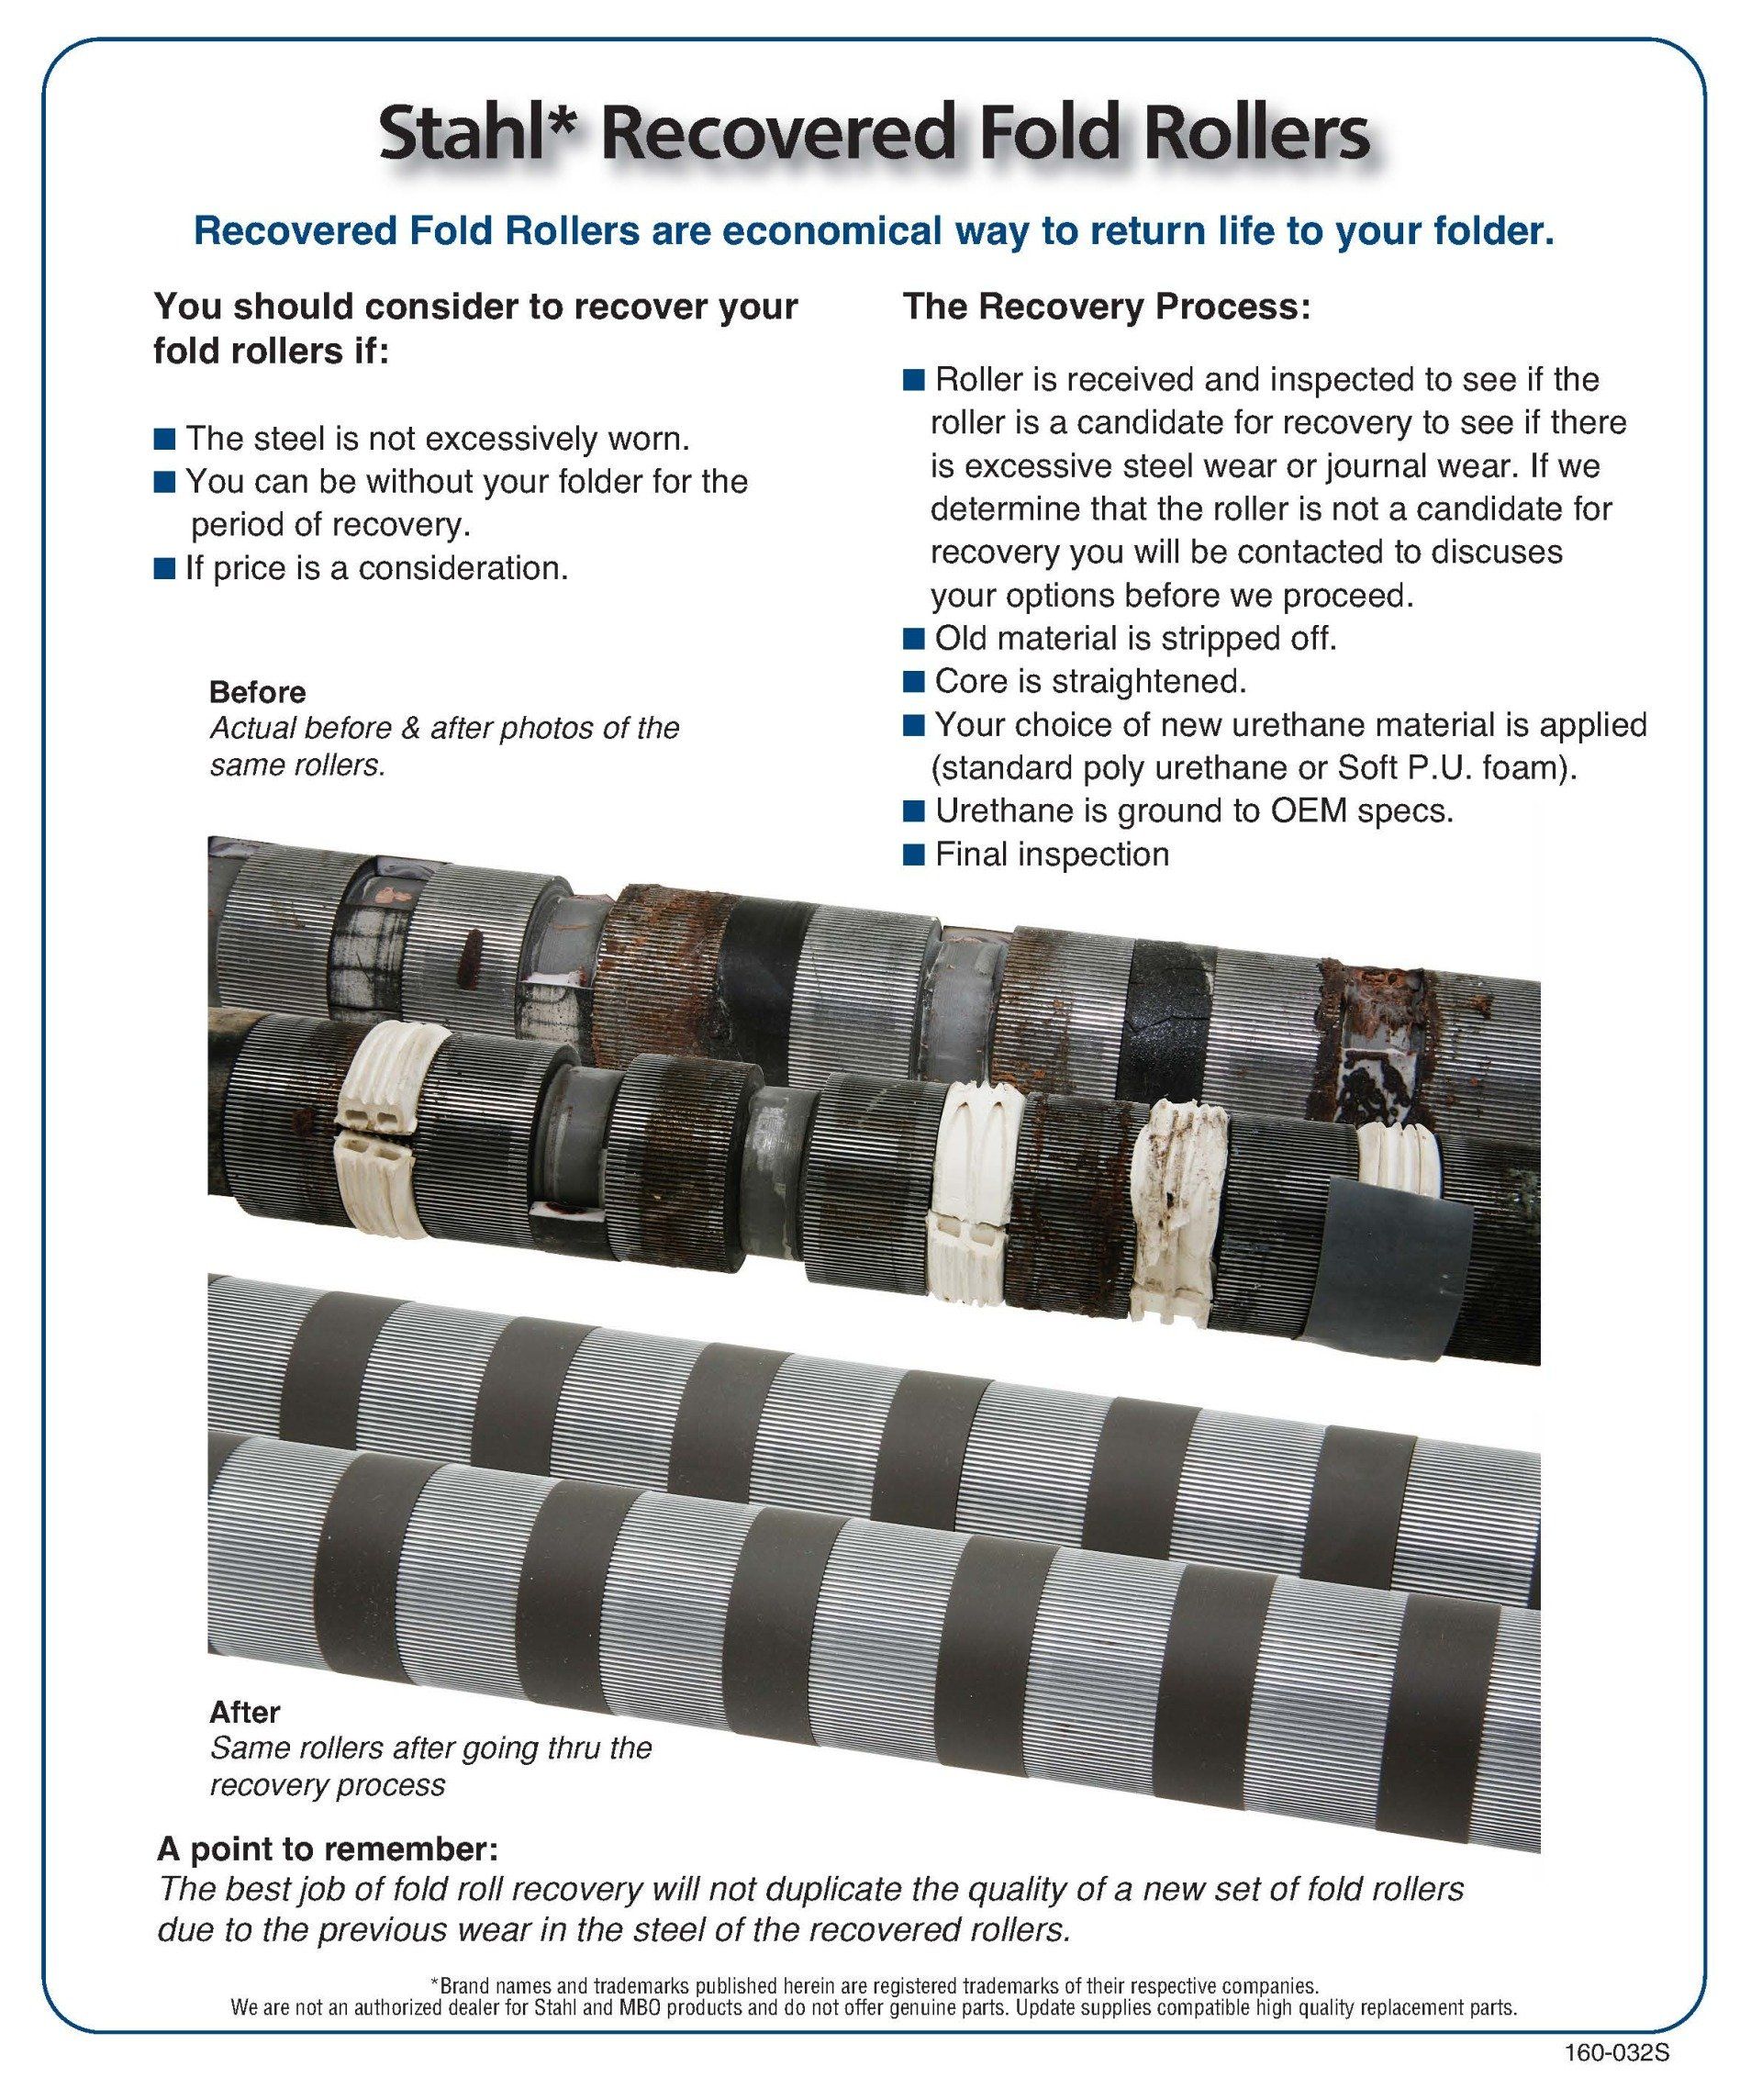 Recovered Fold Rollers Information